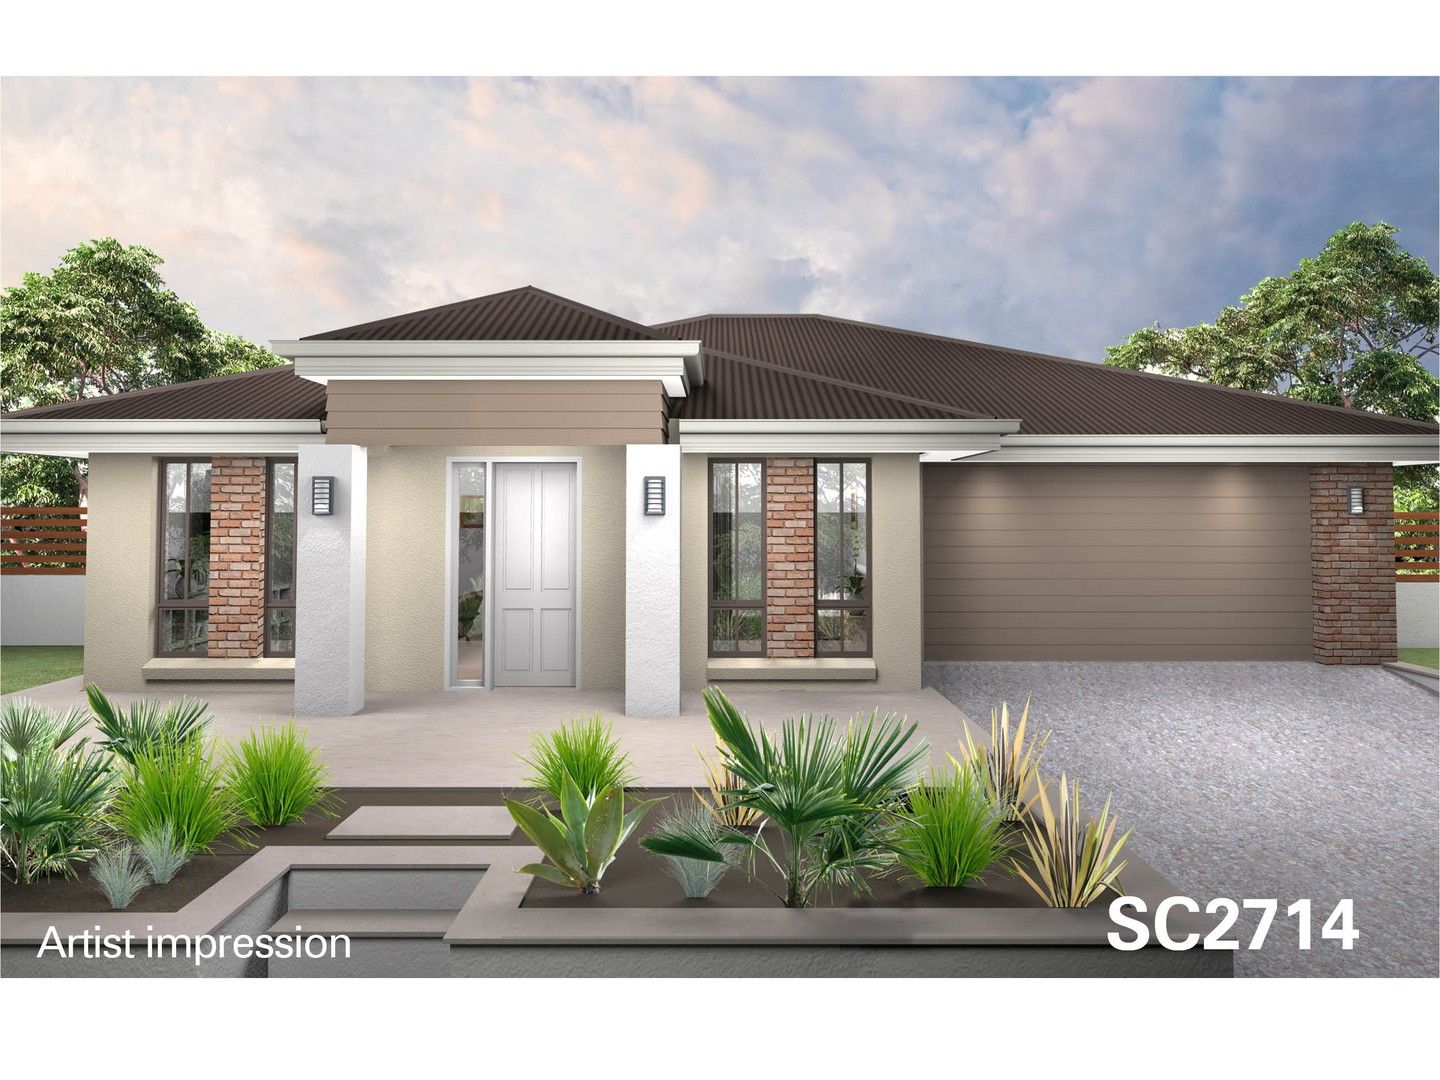 4 bedrooms New House & Land in  ST MARYS NSW, 2760